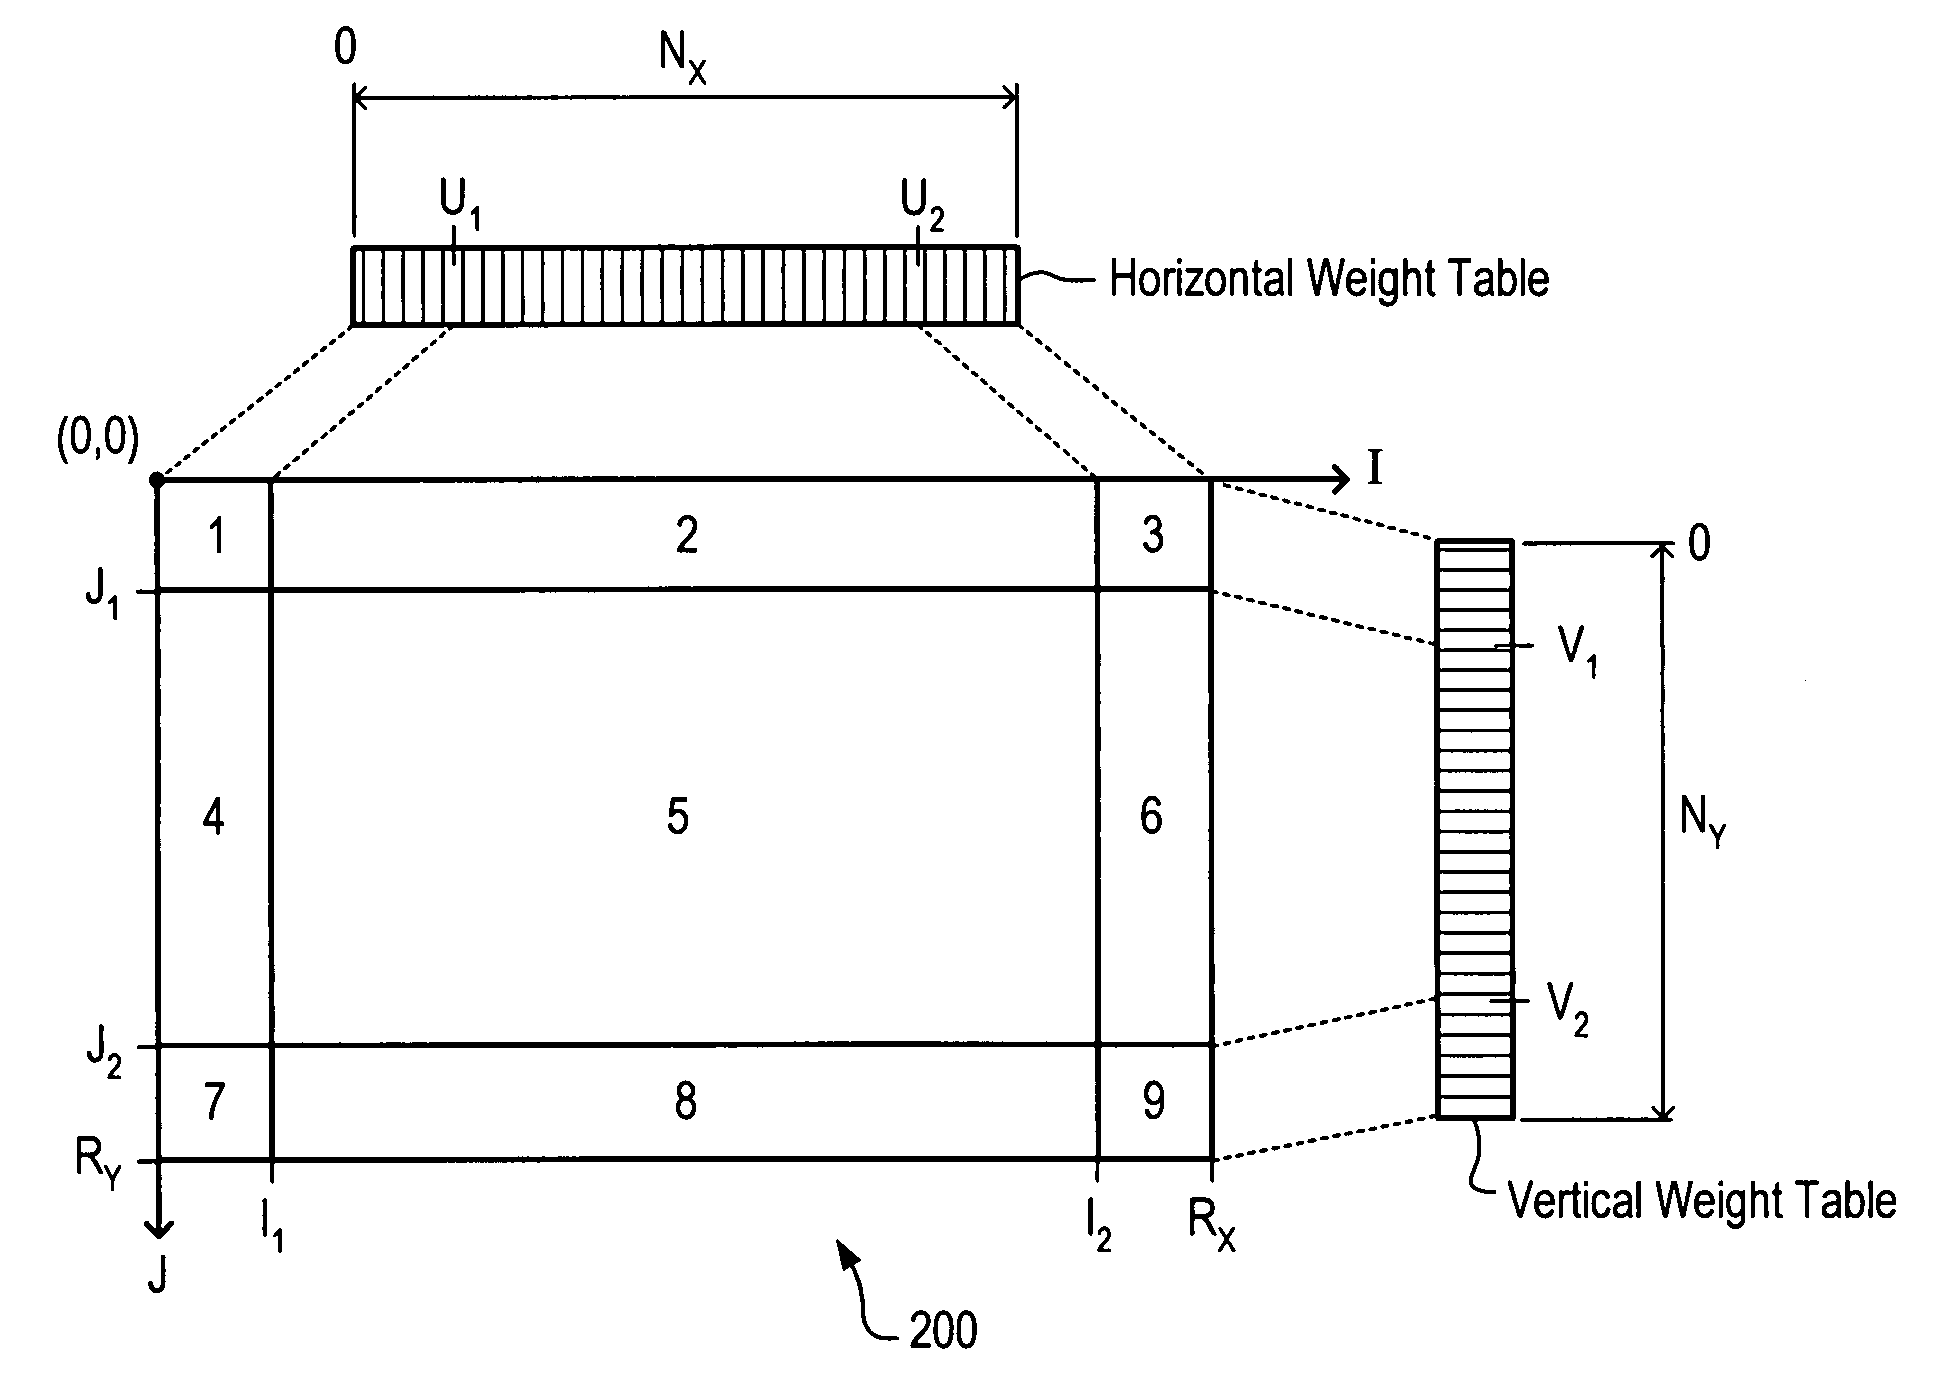 Computing blending functions for the tiling of overlapped video projectors